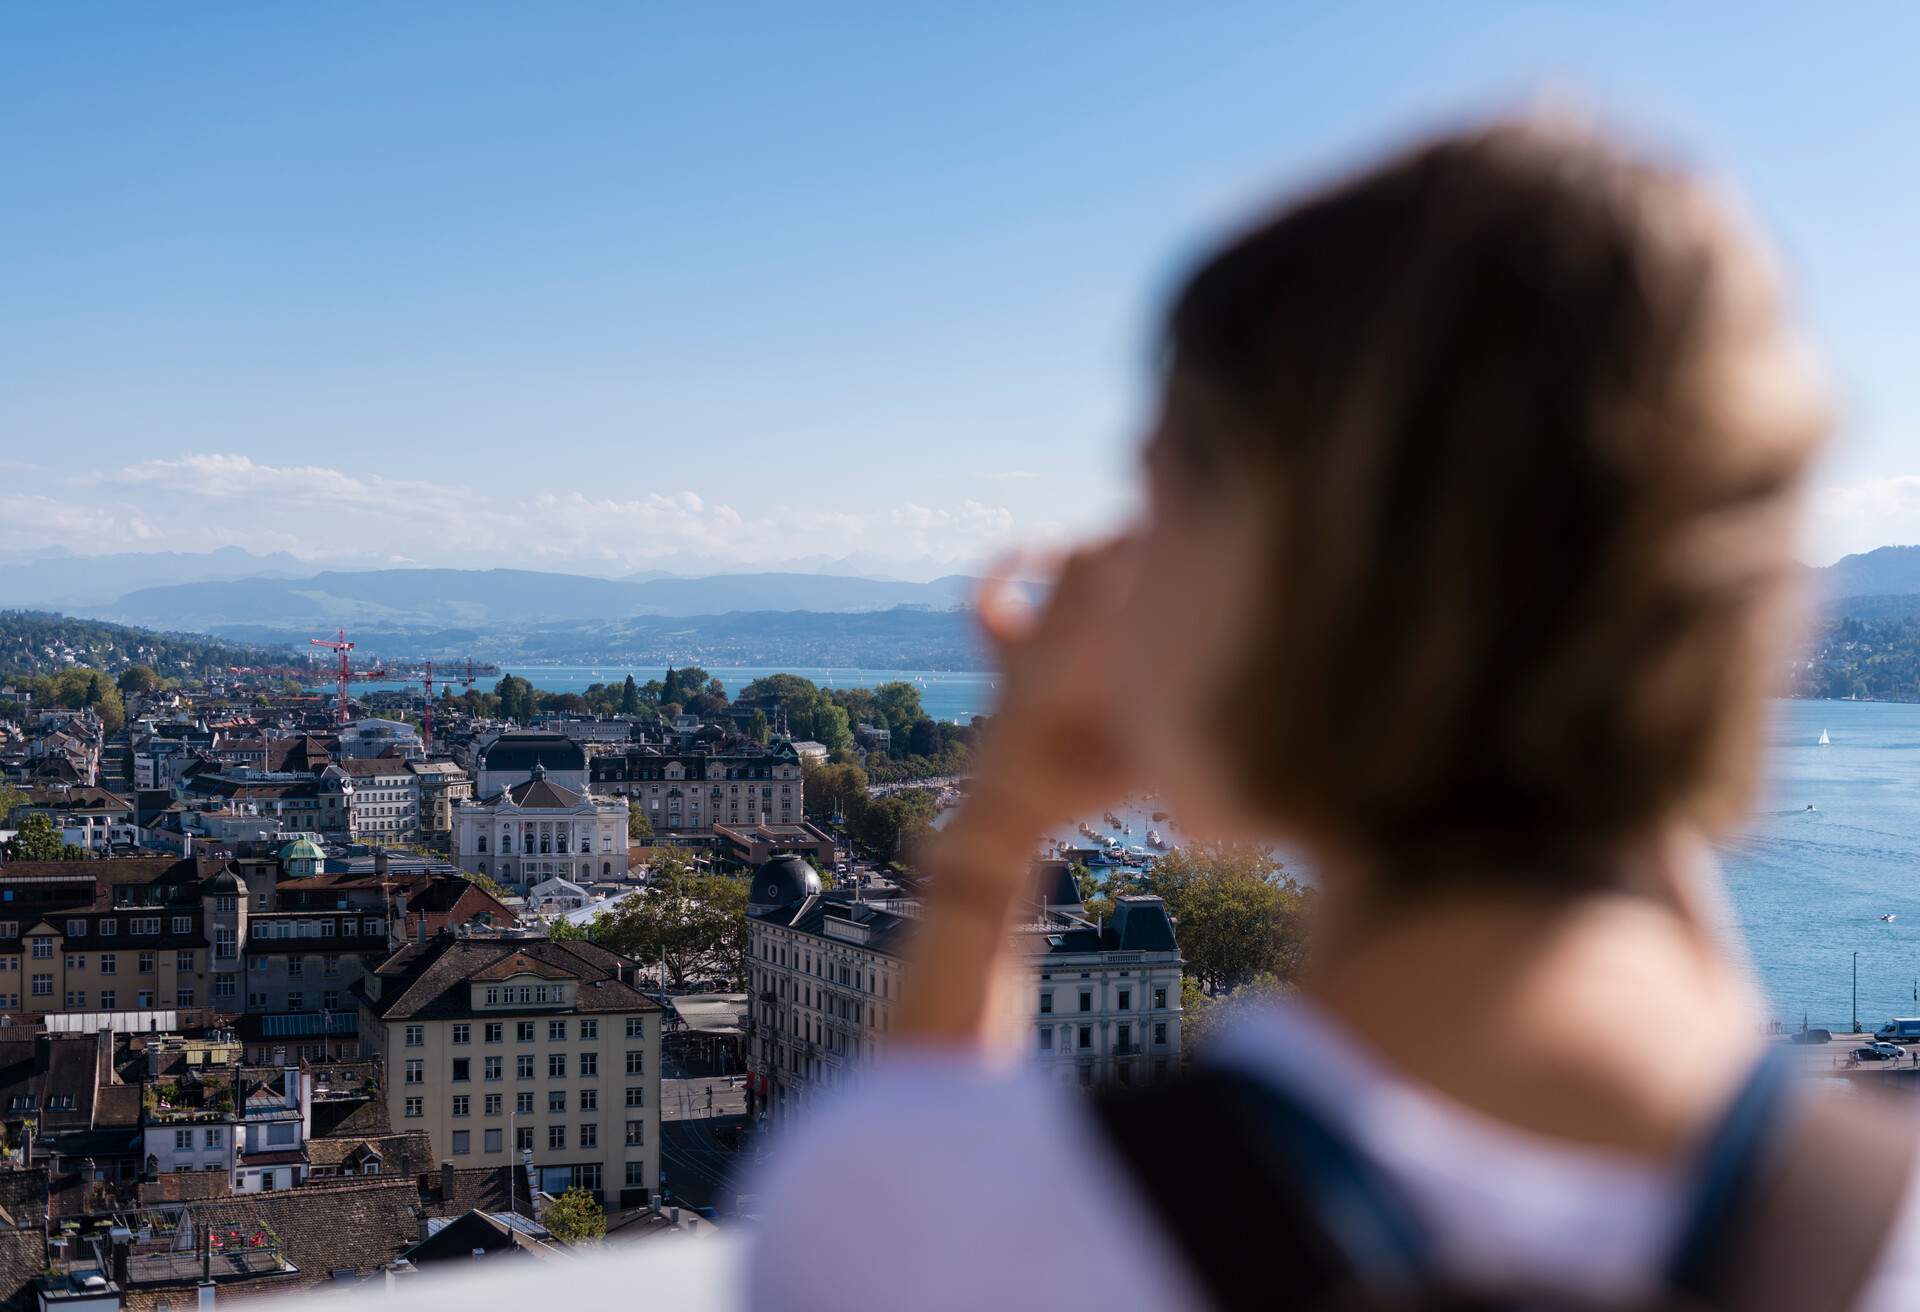 Zurich, Switzerland - 30 September 2016: A female tourist is taking pictures of Zurich from the observation deck on top of Grossmunster cathedral.